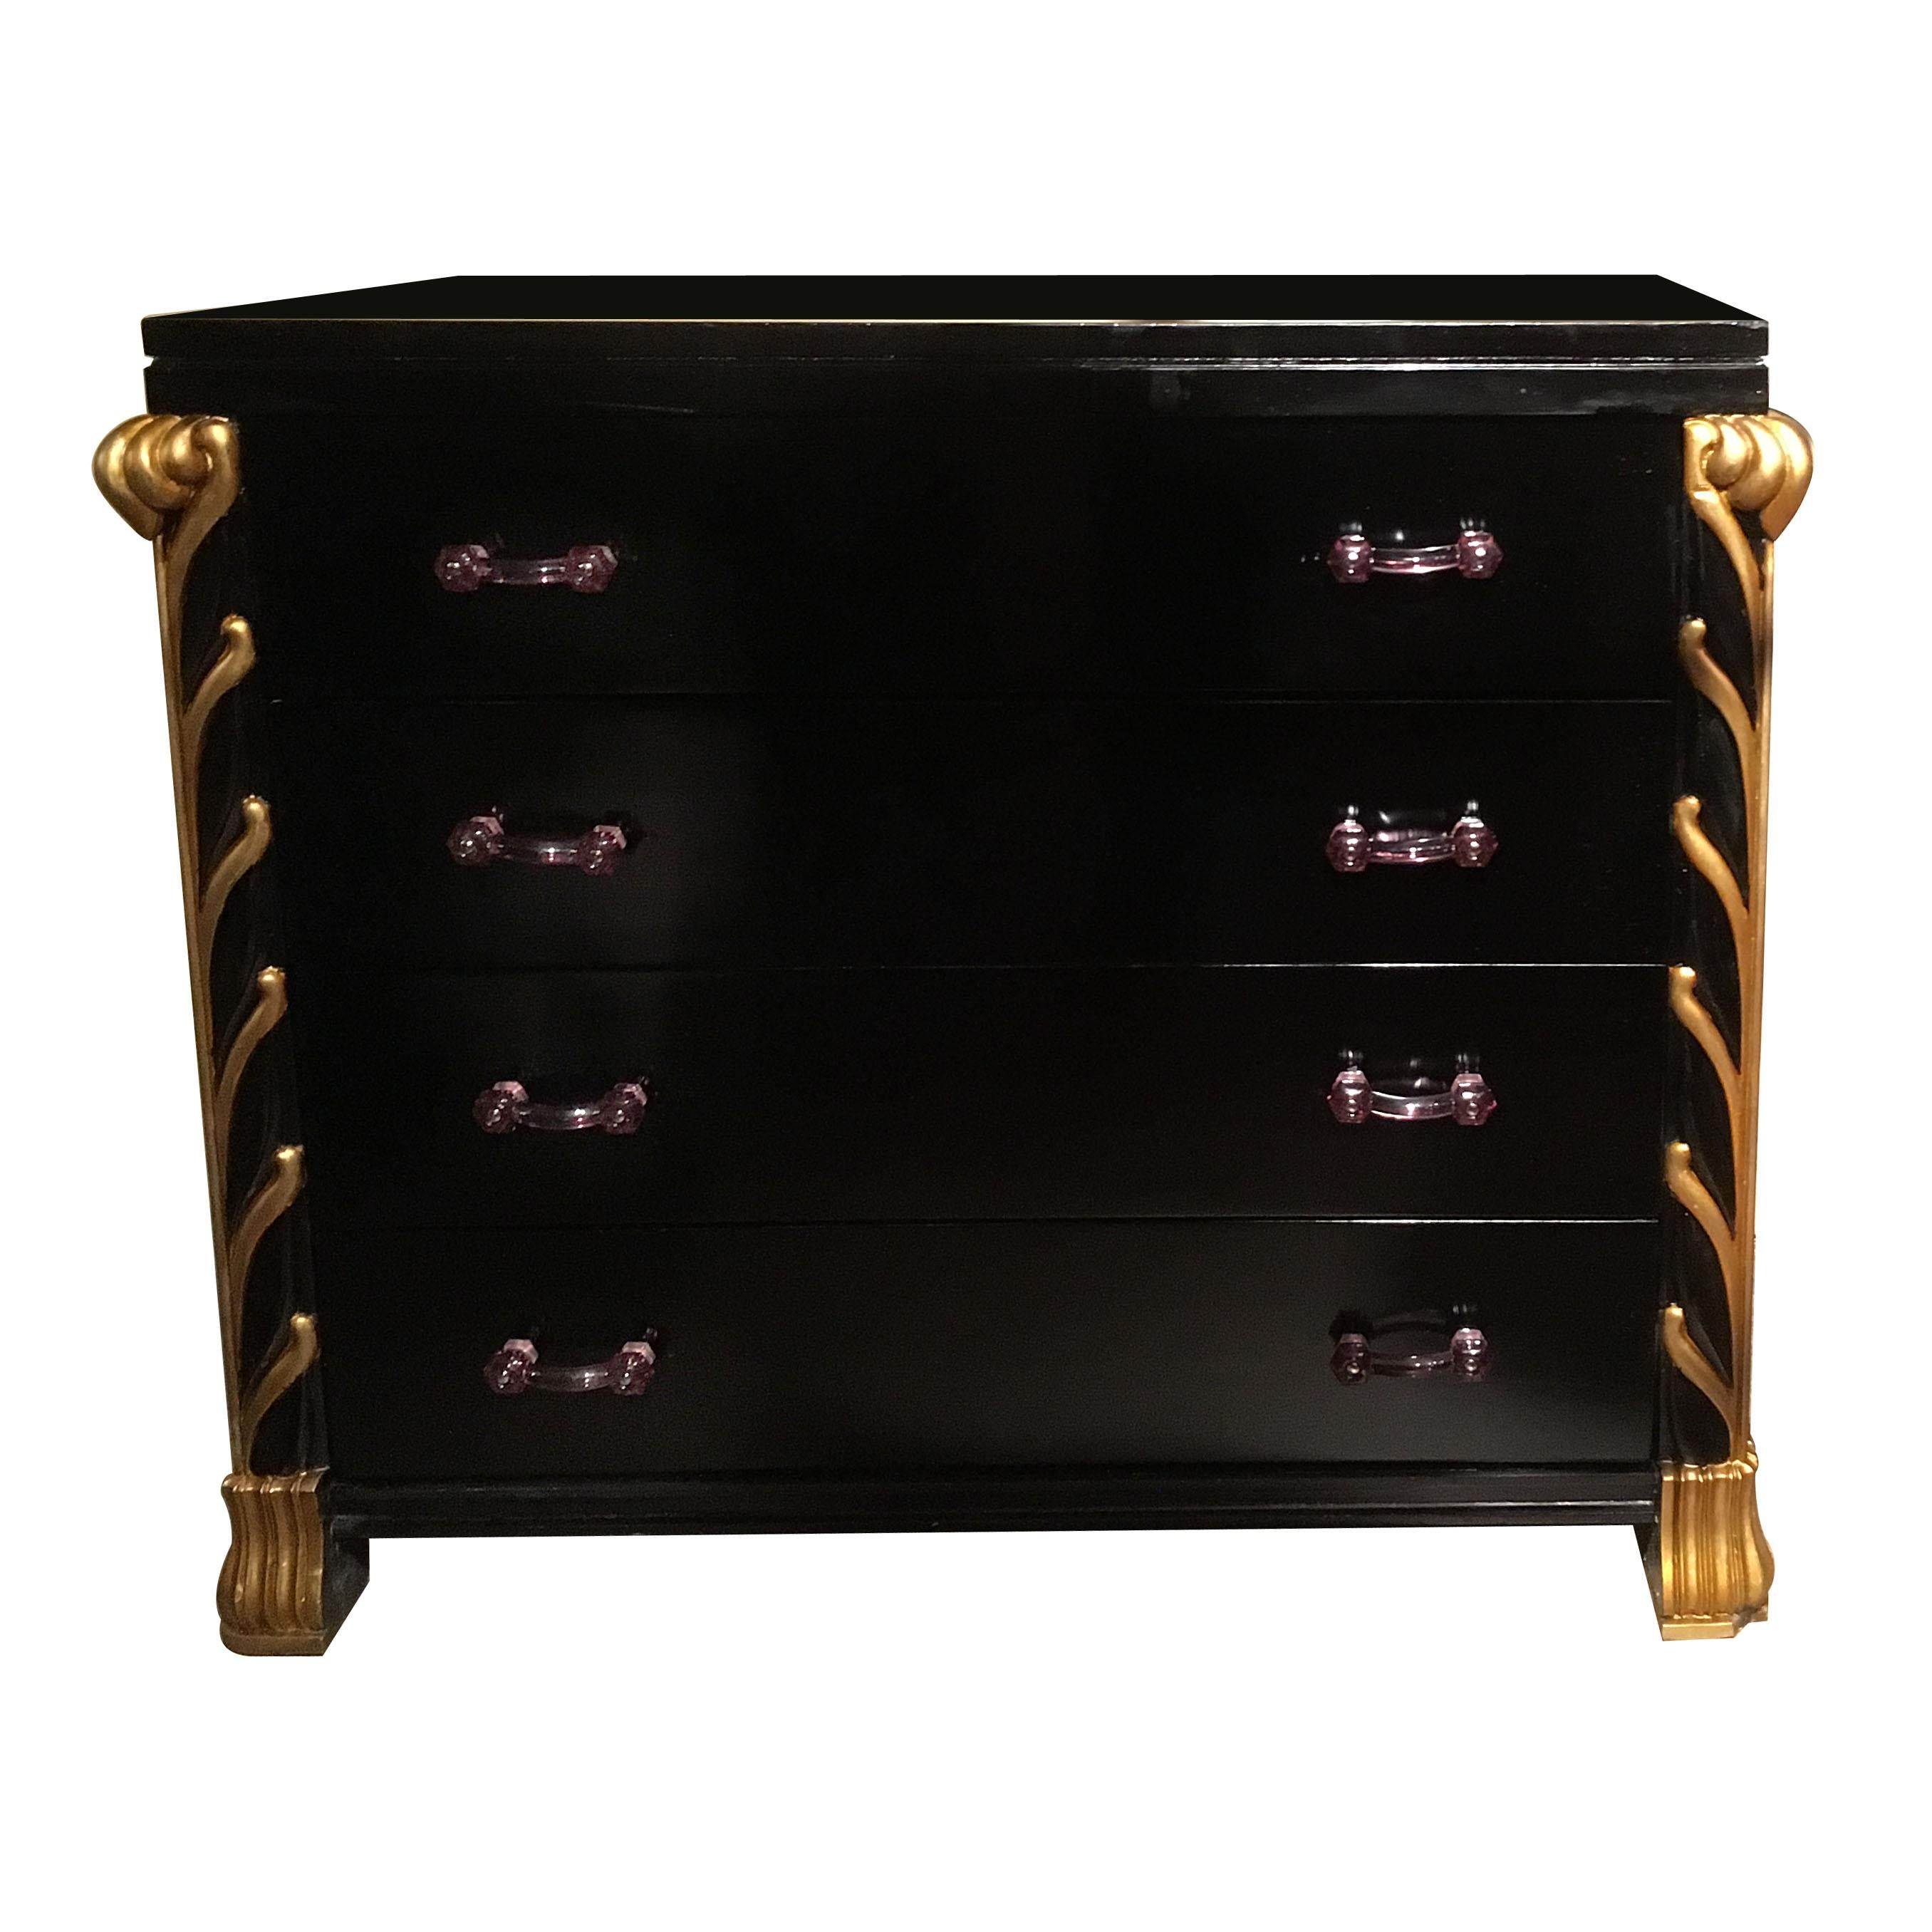 Pair of circa 1940s French black lacquered chests of drawers with gilt details. Amethyst glass pulls.

Measurements:
Width 40